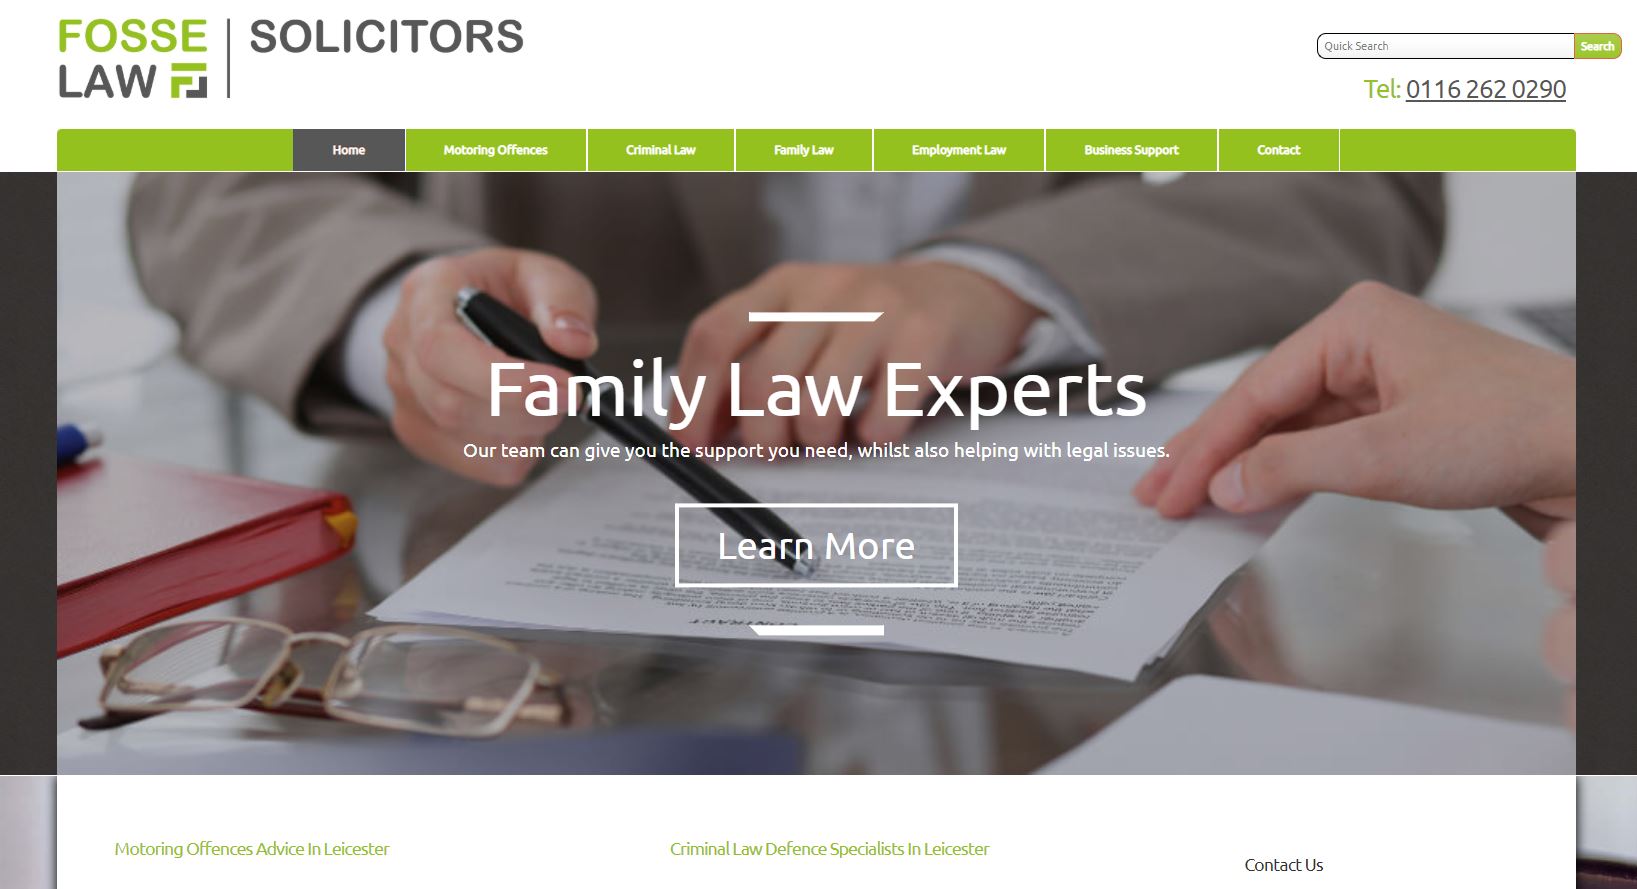 Fosse Law Solicitors